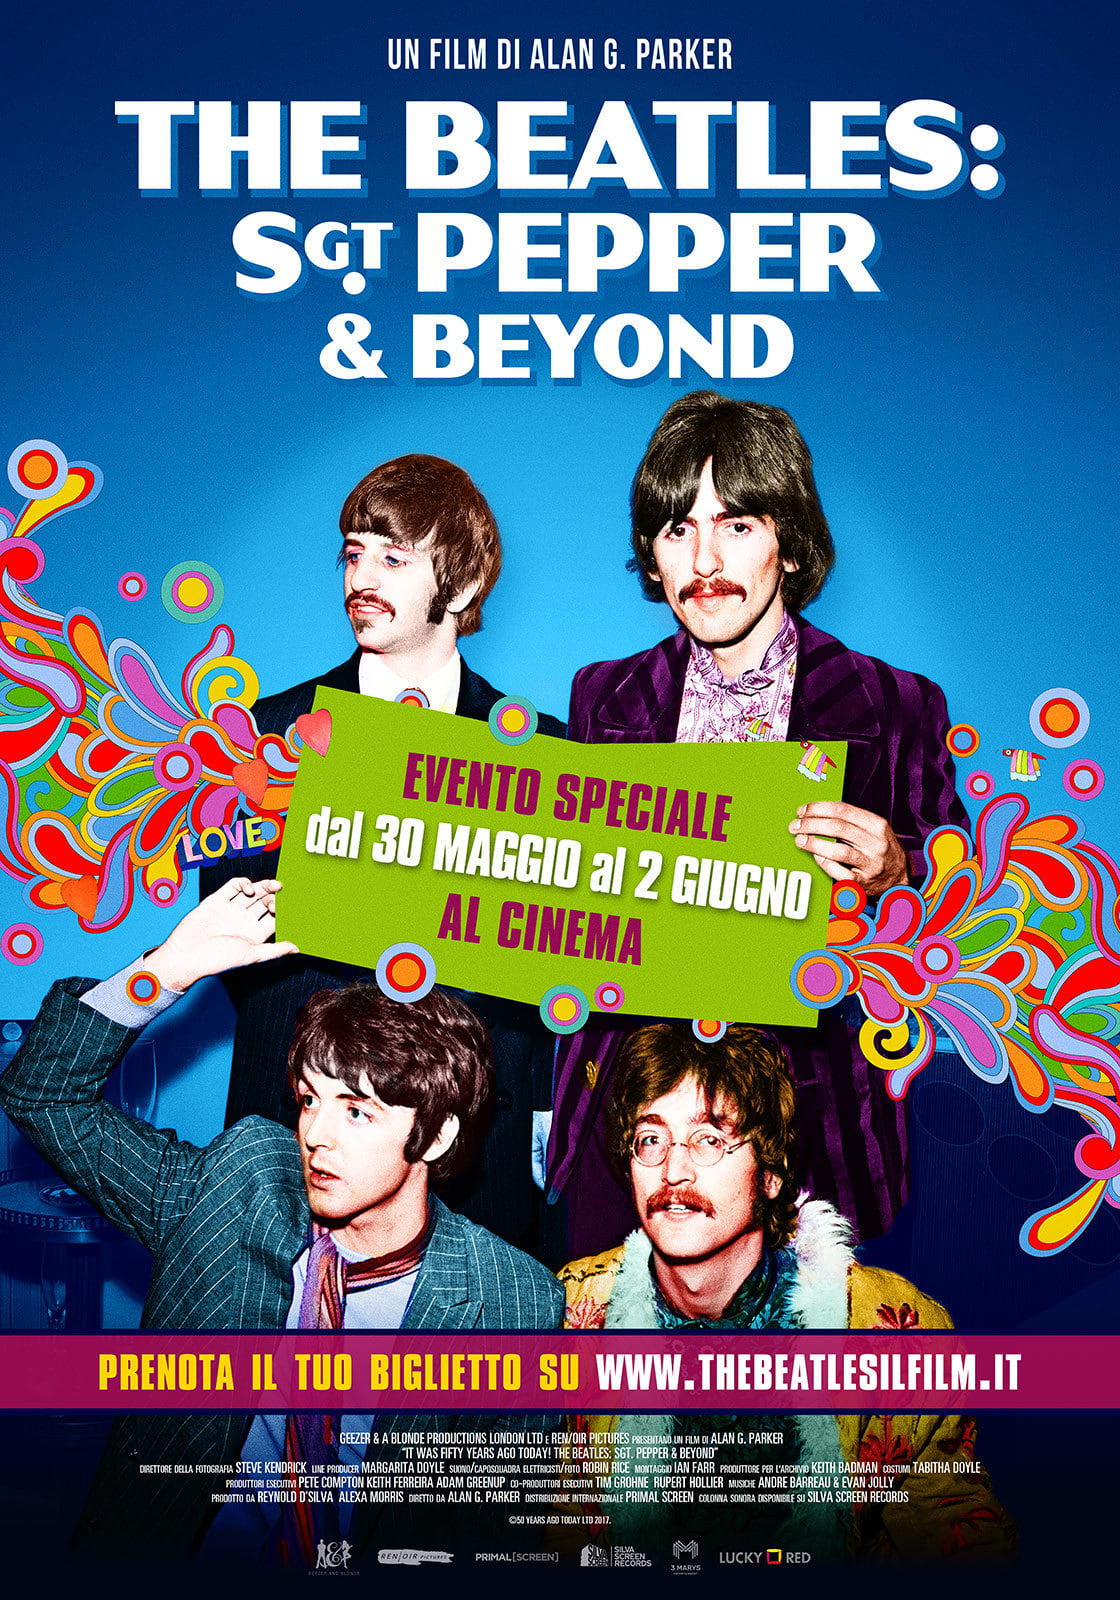 It Was Fifty Years Ago Today! The Beatles: Sgt. Pepper & Beyond